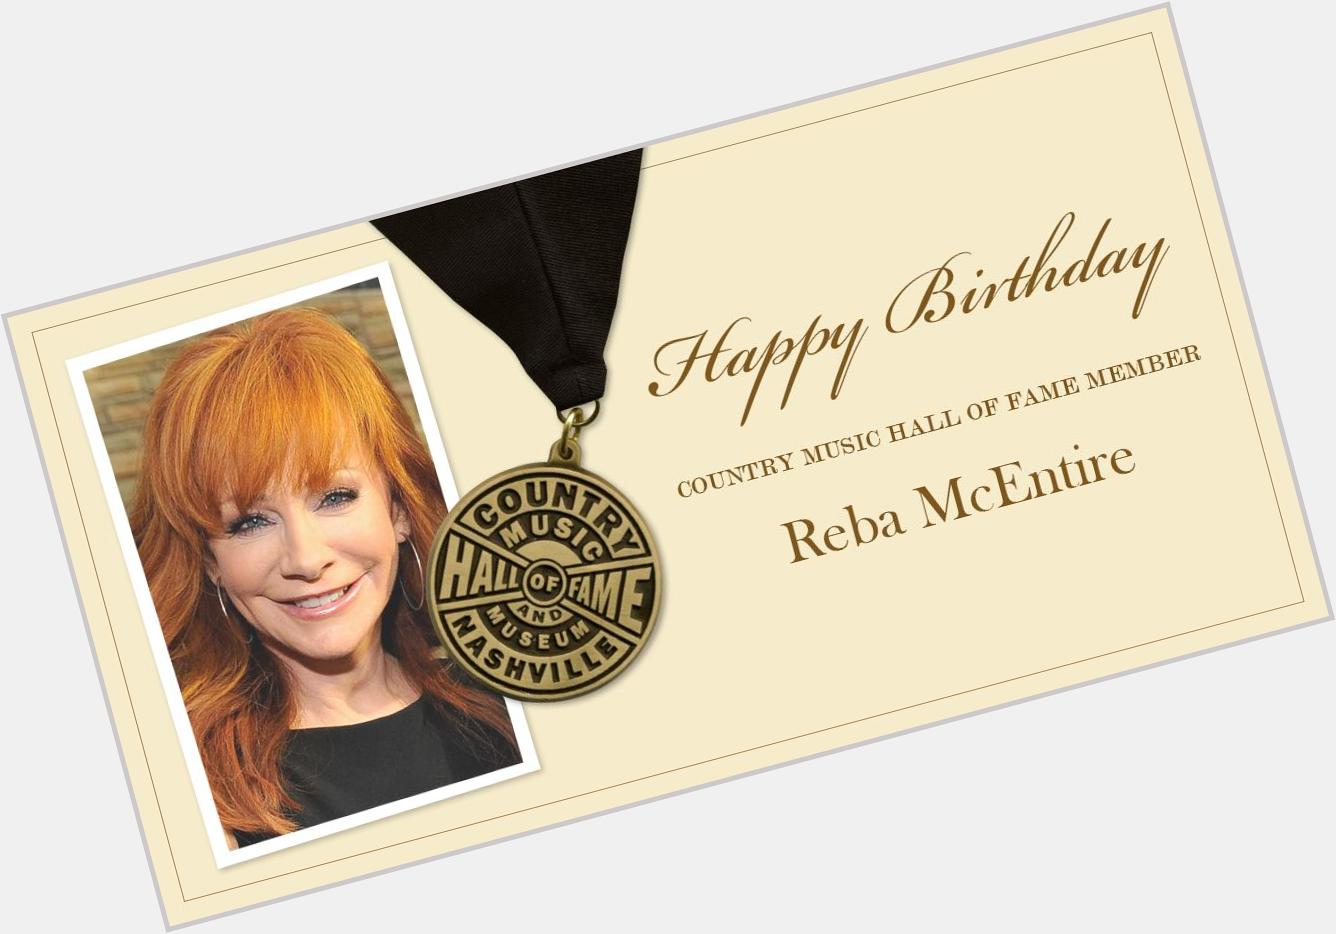 Join us in wishing Country Music Hall of Fame member Reba McEntire ( a very happy birthday! 